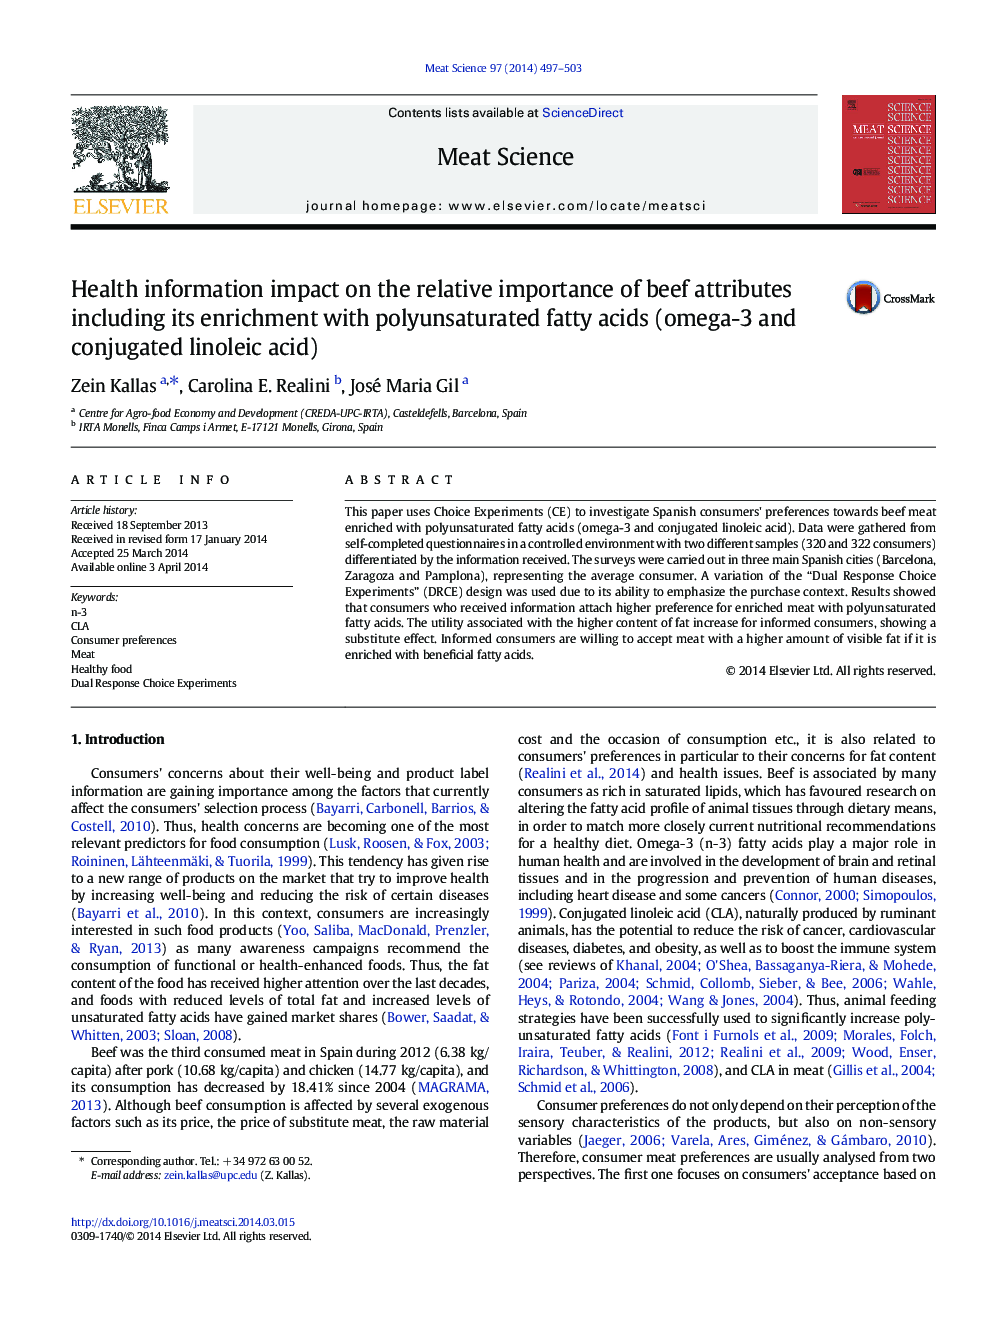 Health information impact on the relative importance of beef attributes including its enrichment with polyunsaturated fatty acids (omega-3 and conjugated linoleic acid)